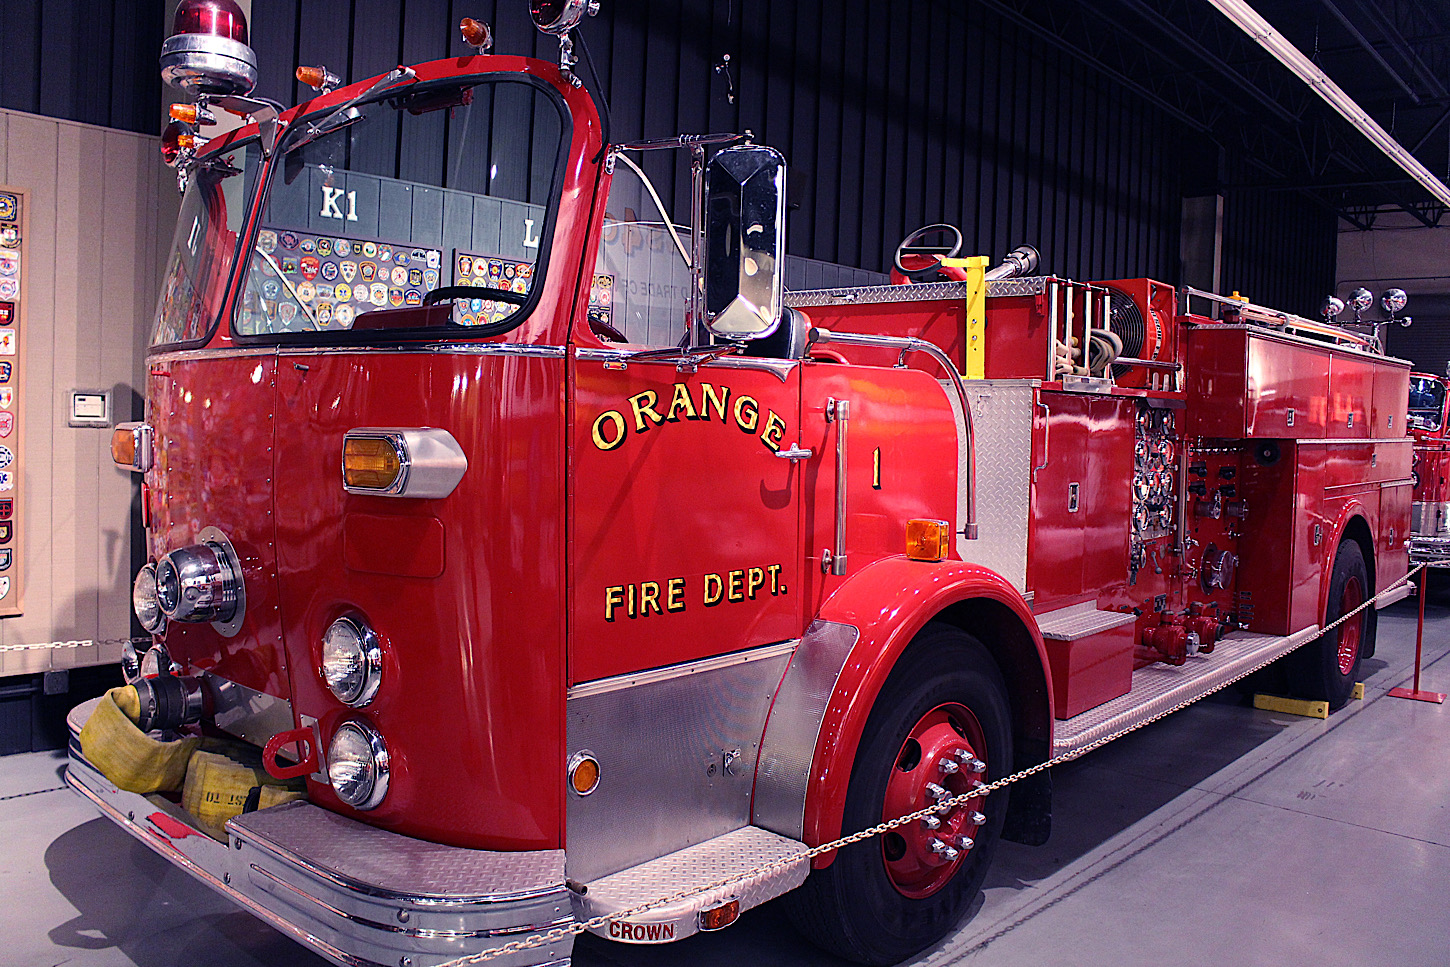 1972 Crown Firecoach - Hall of Flame Museum